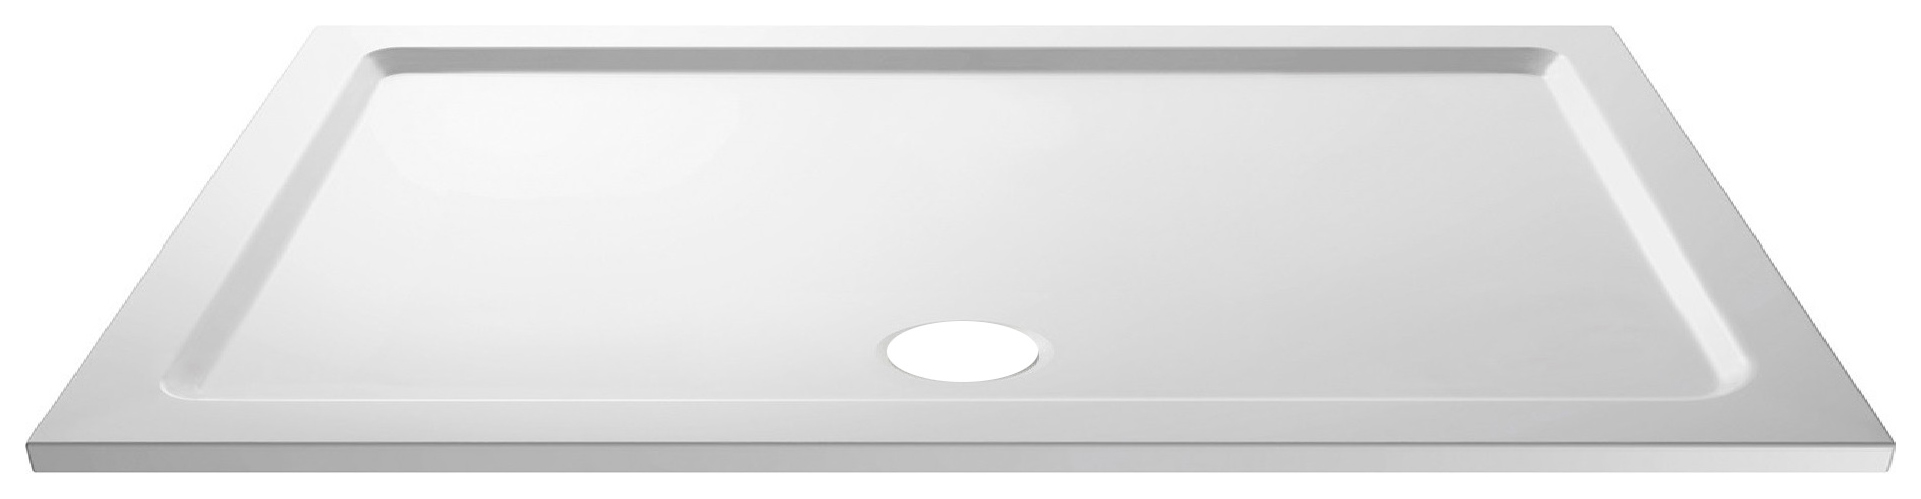 Image of Wickes 40mm Pearlstone Rectangular Shower Tray - 1700 x 800mm